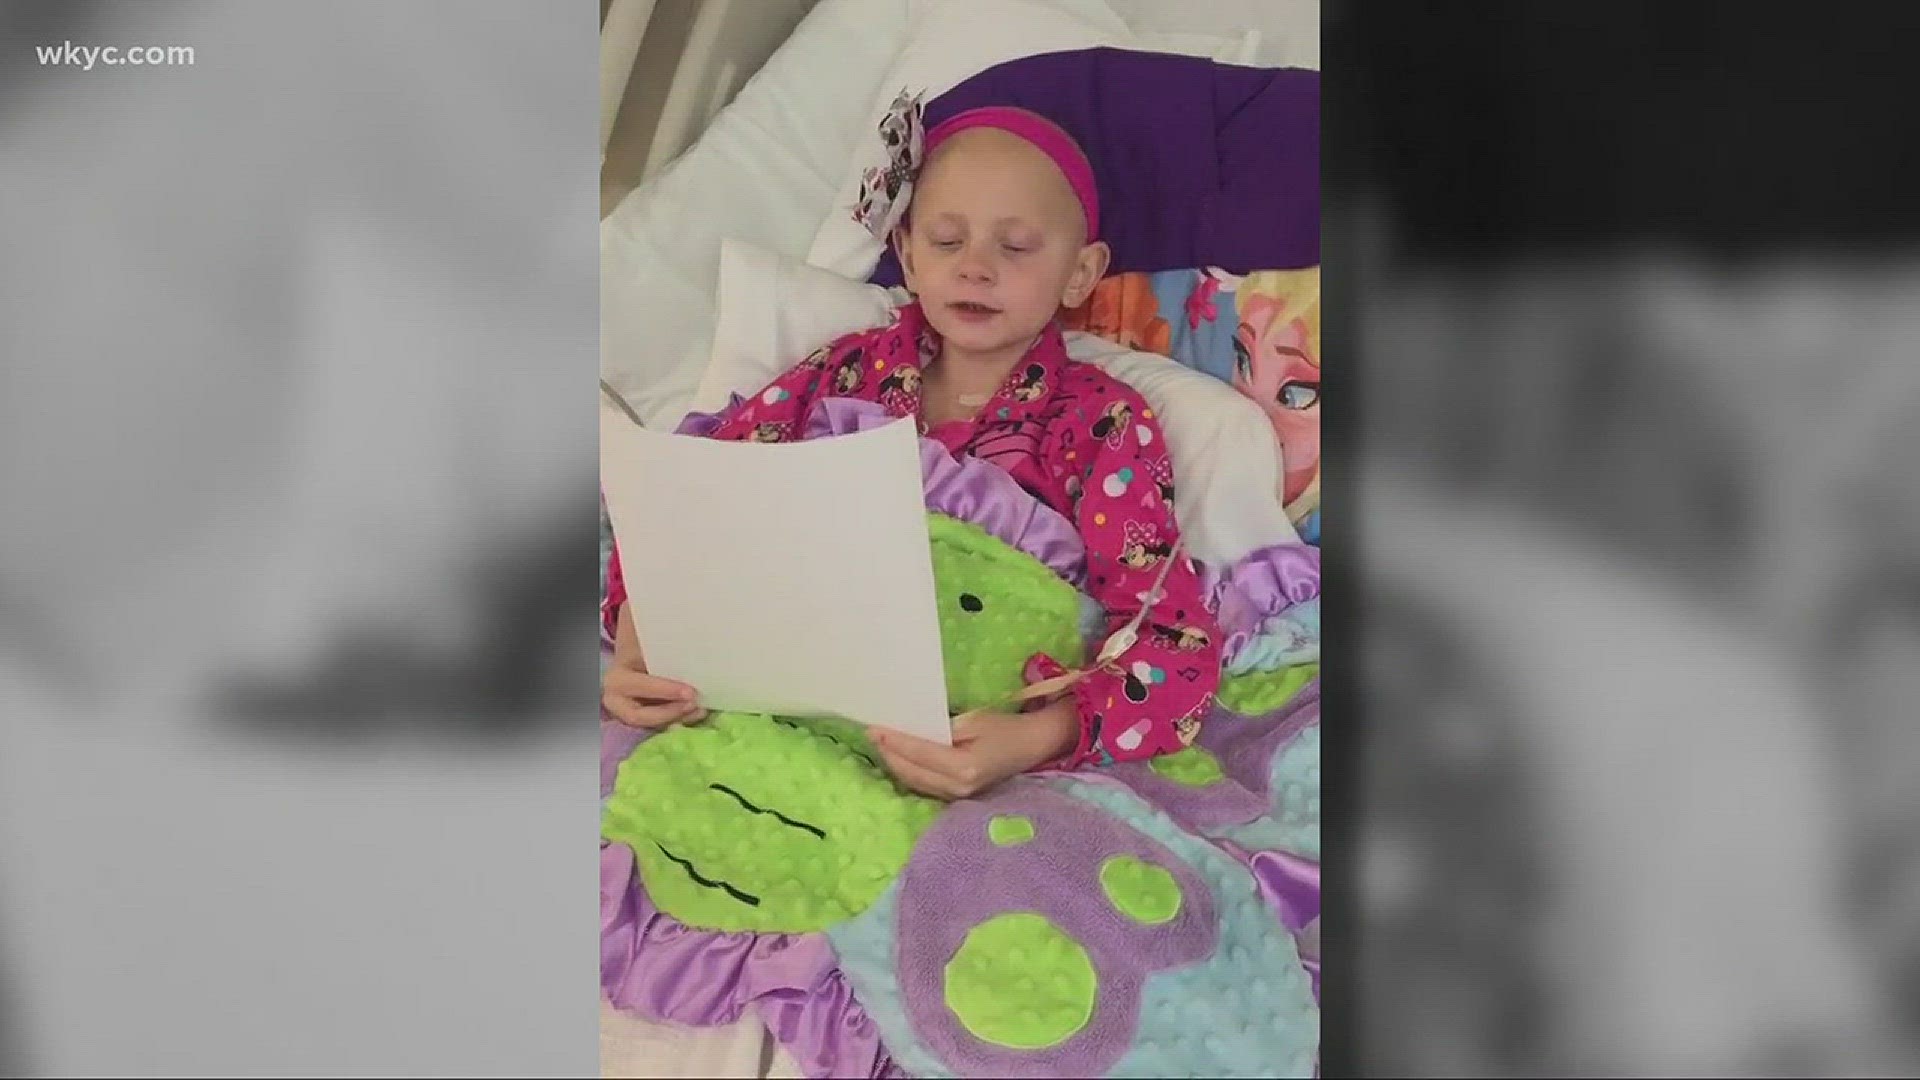 9-year-old Kylie Rose is impacting  others after beating cancer three times